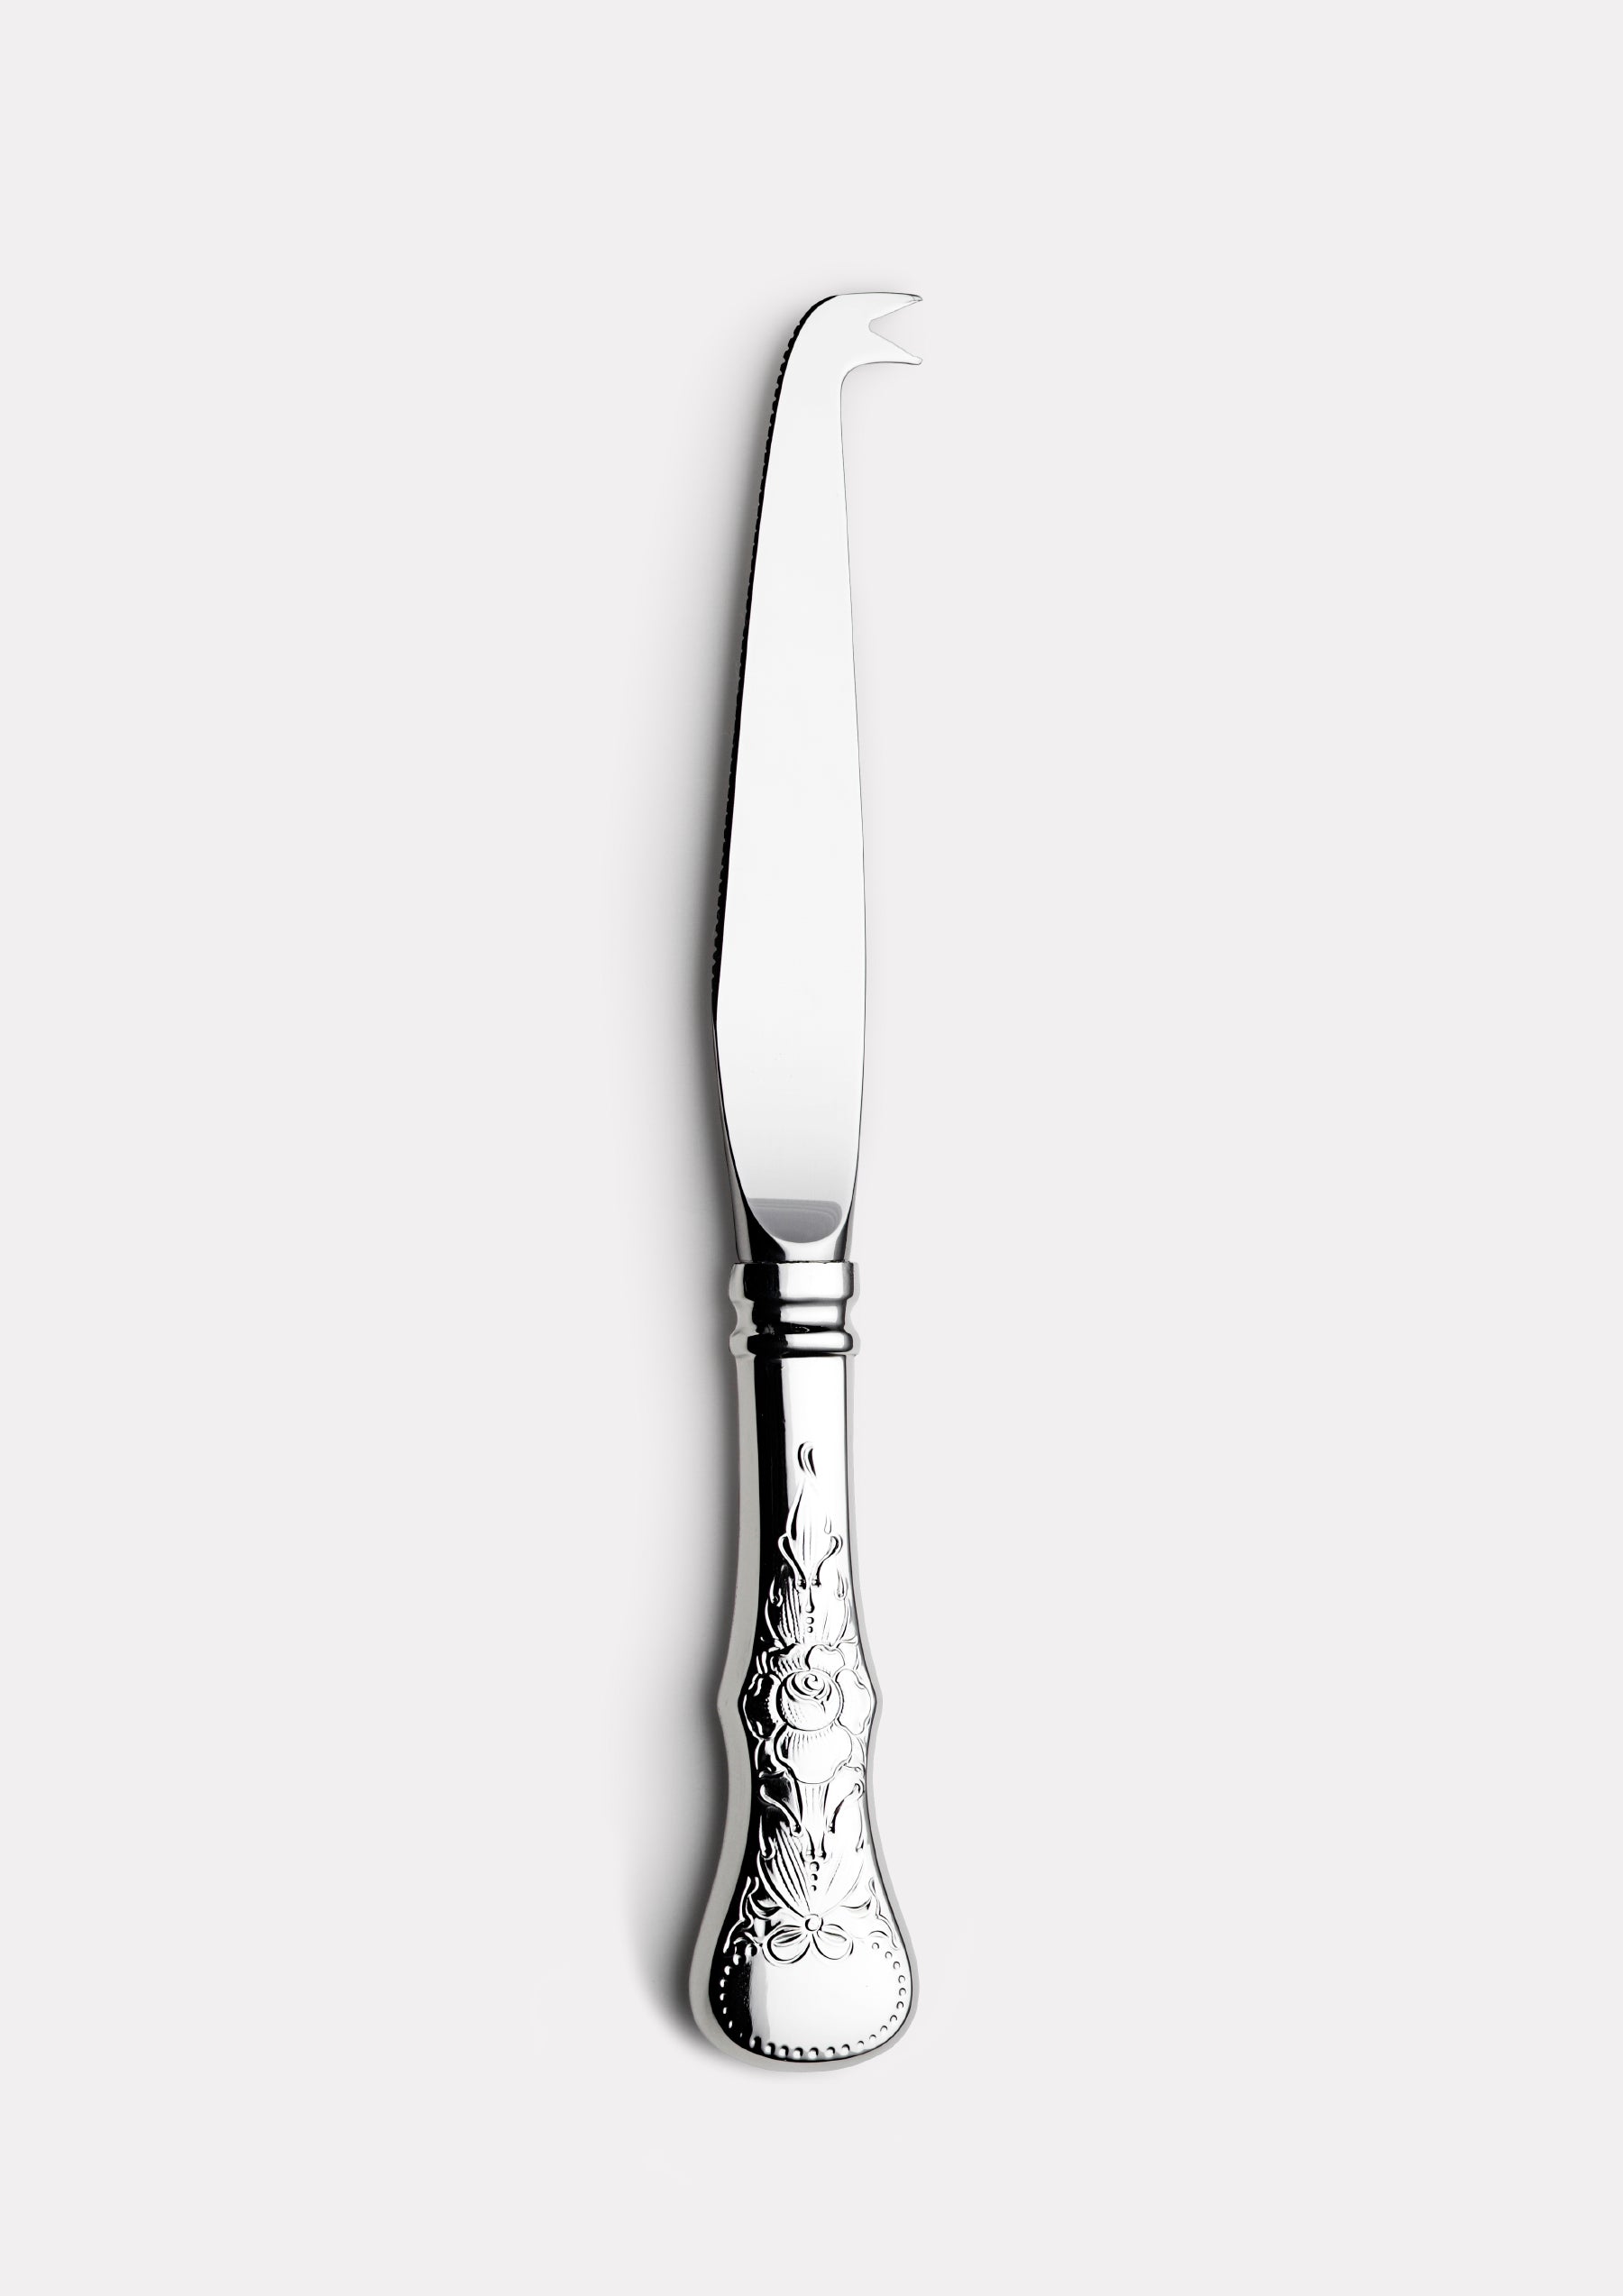 Rose cheese knife